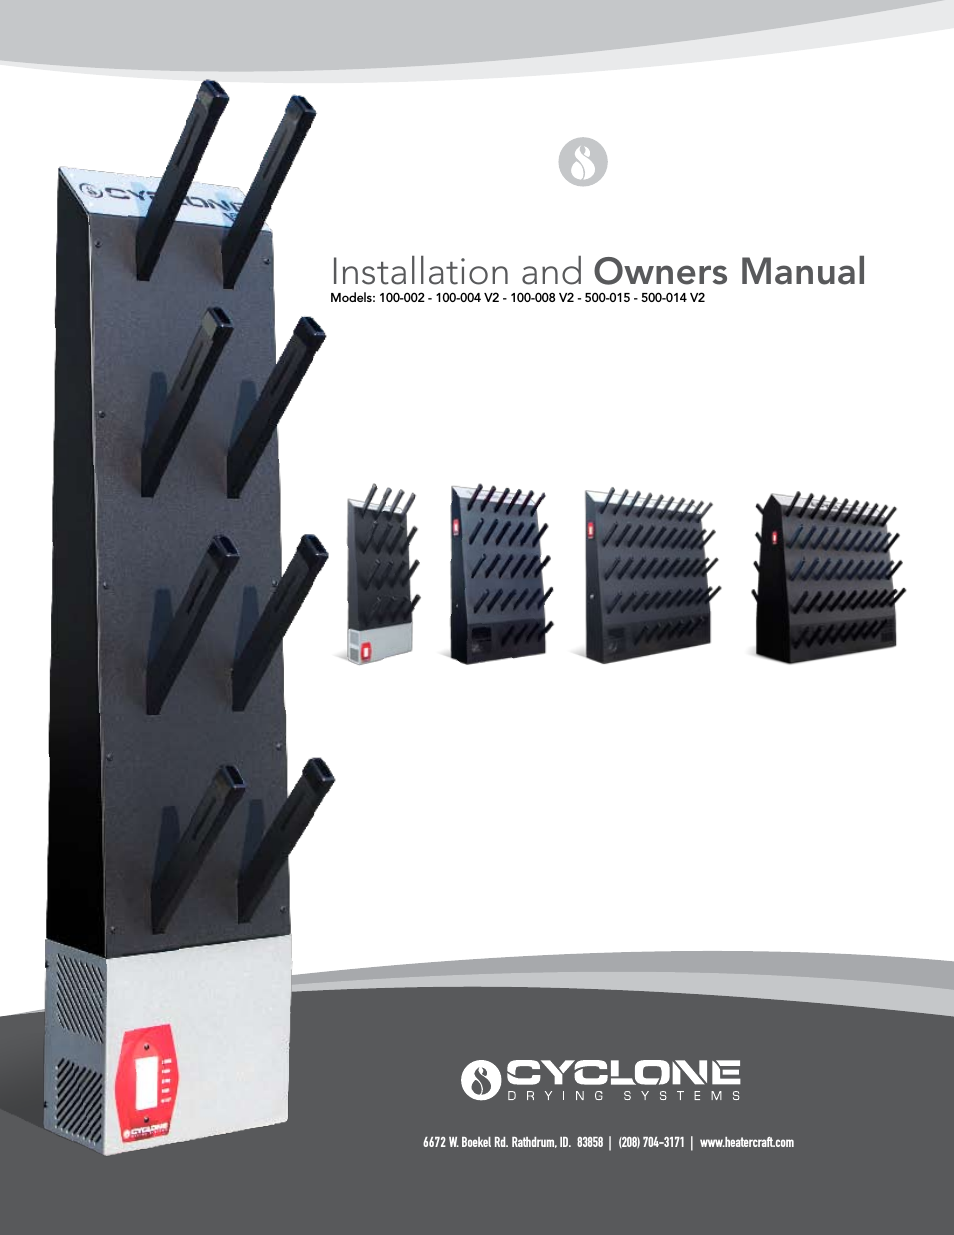 500-014 V2 Cyclone drying systems